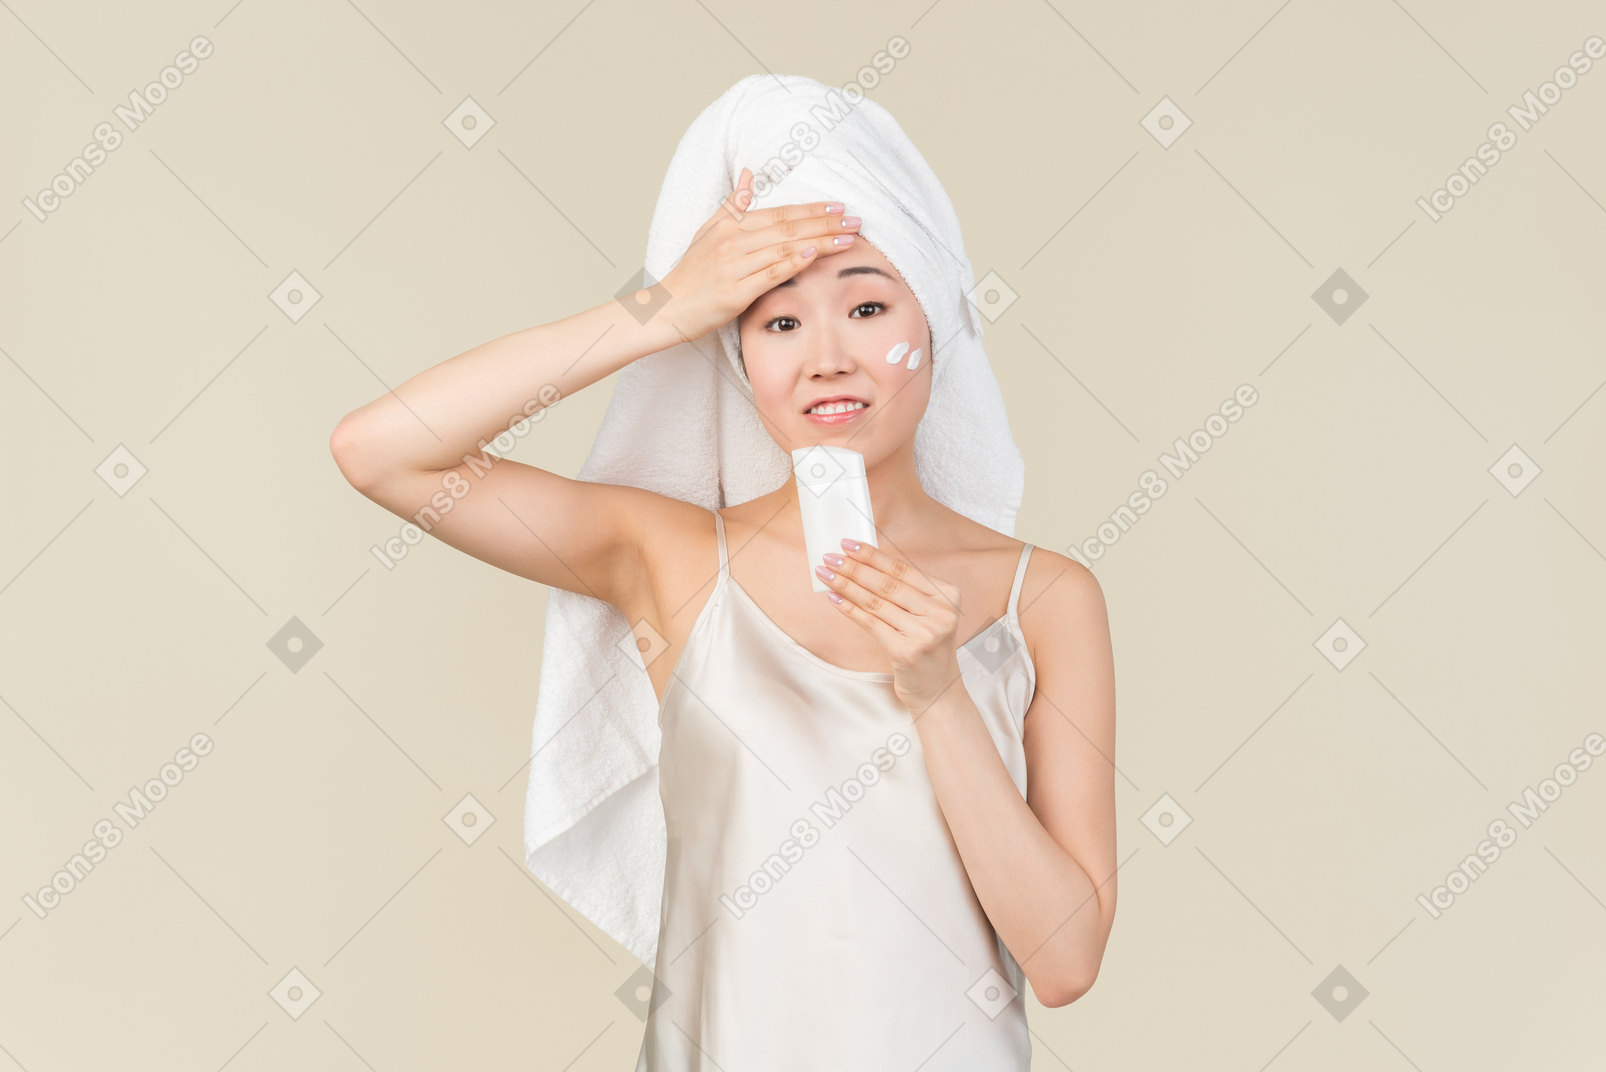 Asian woman with hair wrapped in towel holding cream and touching head